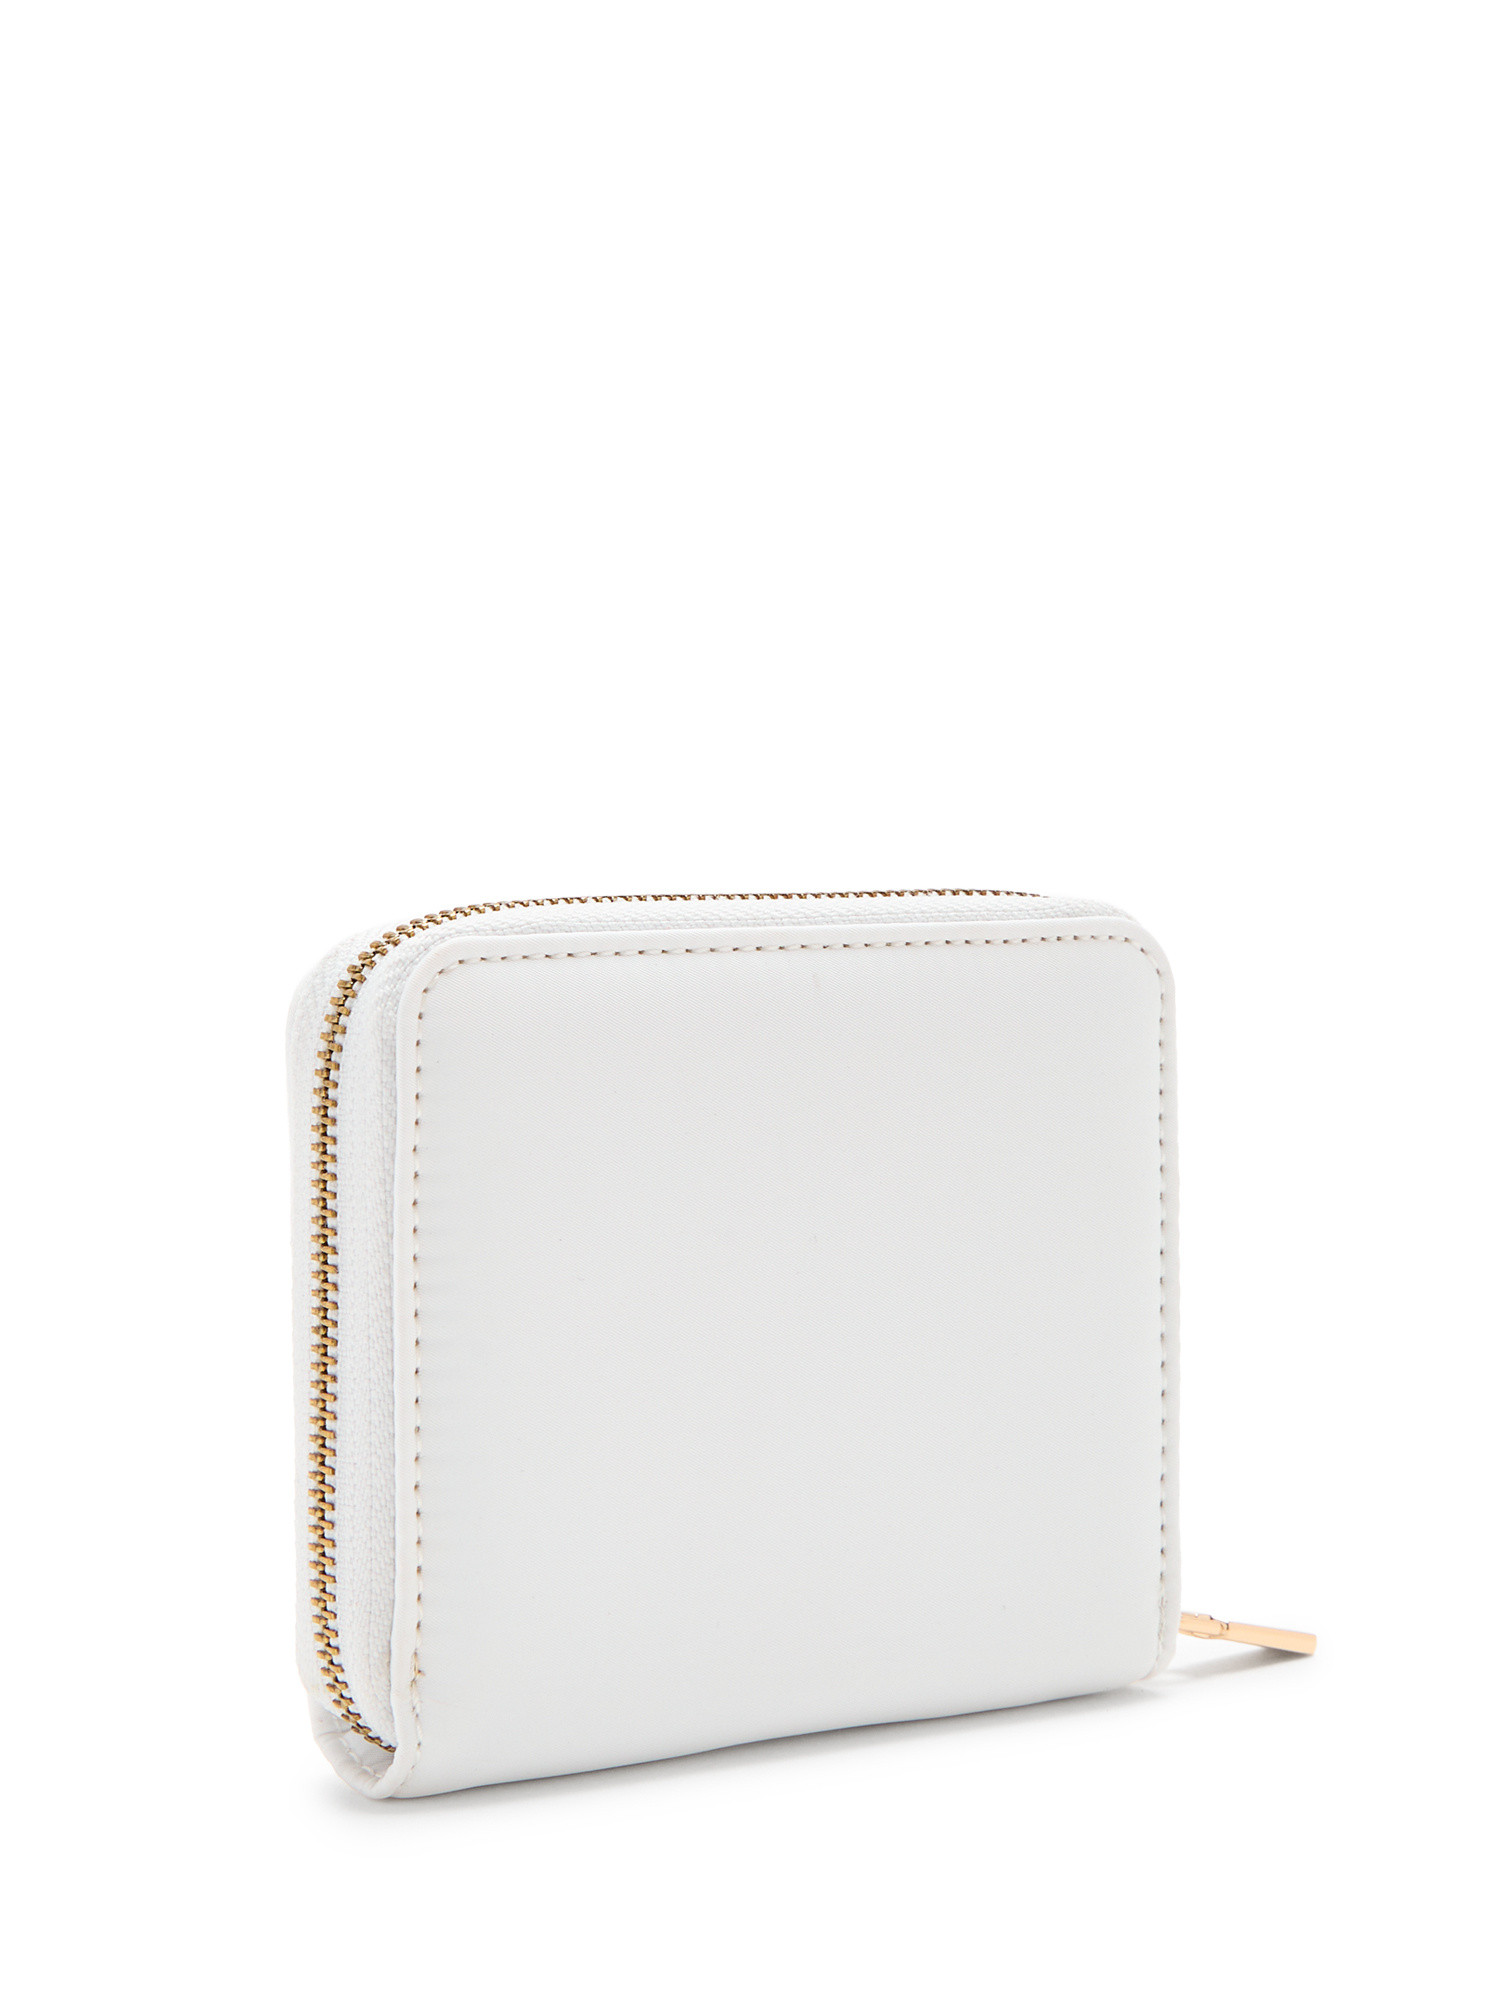 Guess - Gemma eco mini wallet, White, large image number 1